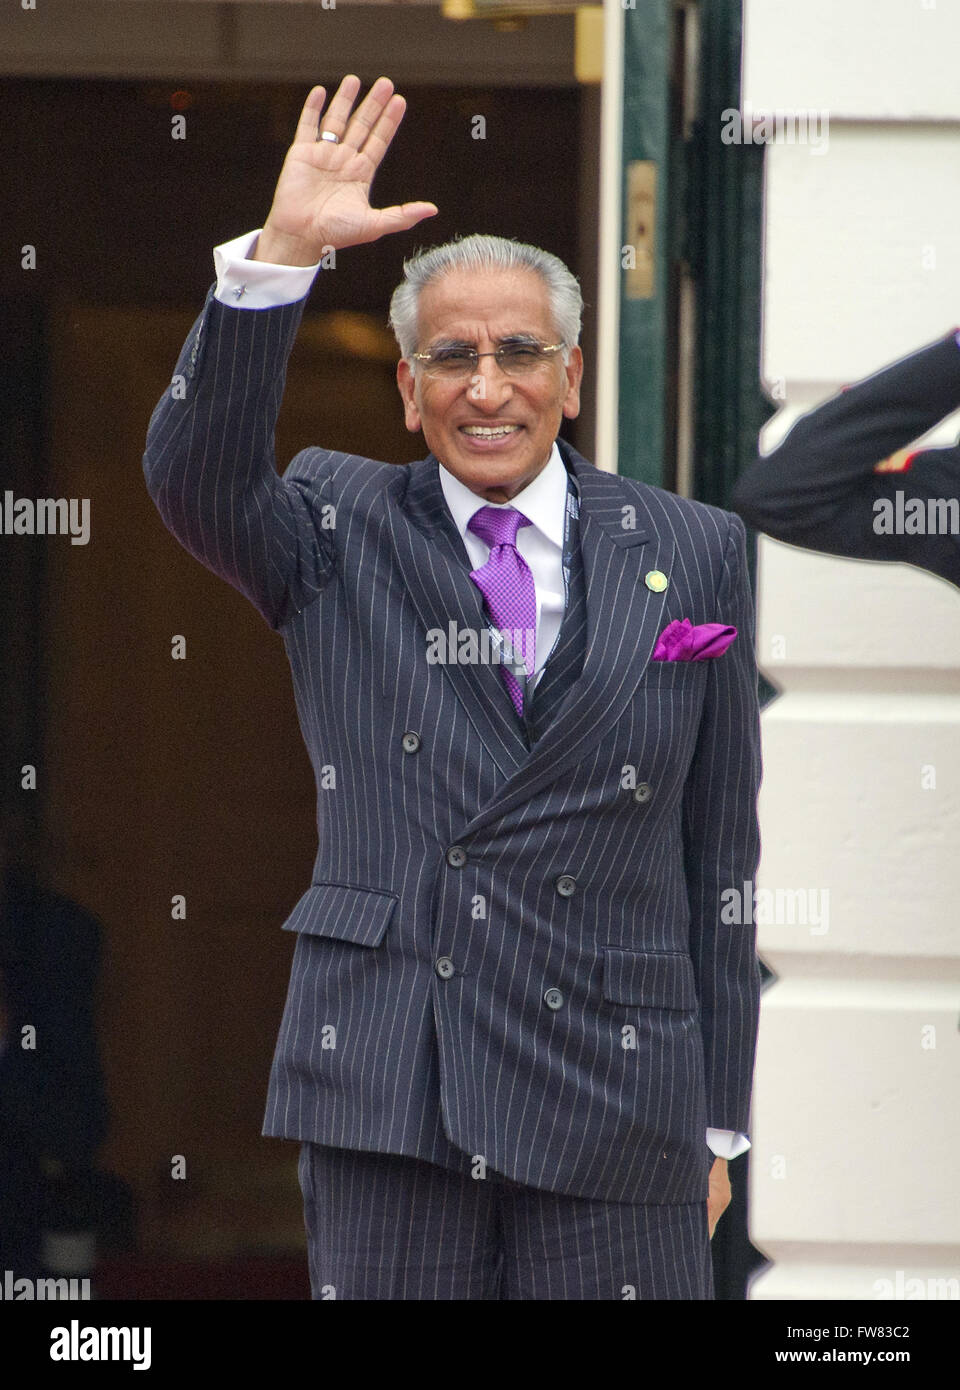 Washington, District of Columbia, USA. 31st Mar, 2016. Tariq Fatemi, Minister of State for Foreign Affairs of the Islamic Republic of Pakistan, arrives for the working dinner for the heads of delegations at the Nuclear Security Summit on the South Lawn of the White House in Washington, DC on Thursday, March 31, 2016.Credit: Ron Sachs/Pool via CNP Credit:  Ron Sachs/CNP/ZUMA Wire/Alamy Live News Stock Photo